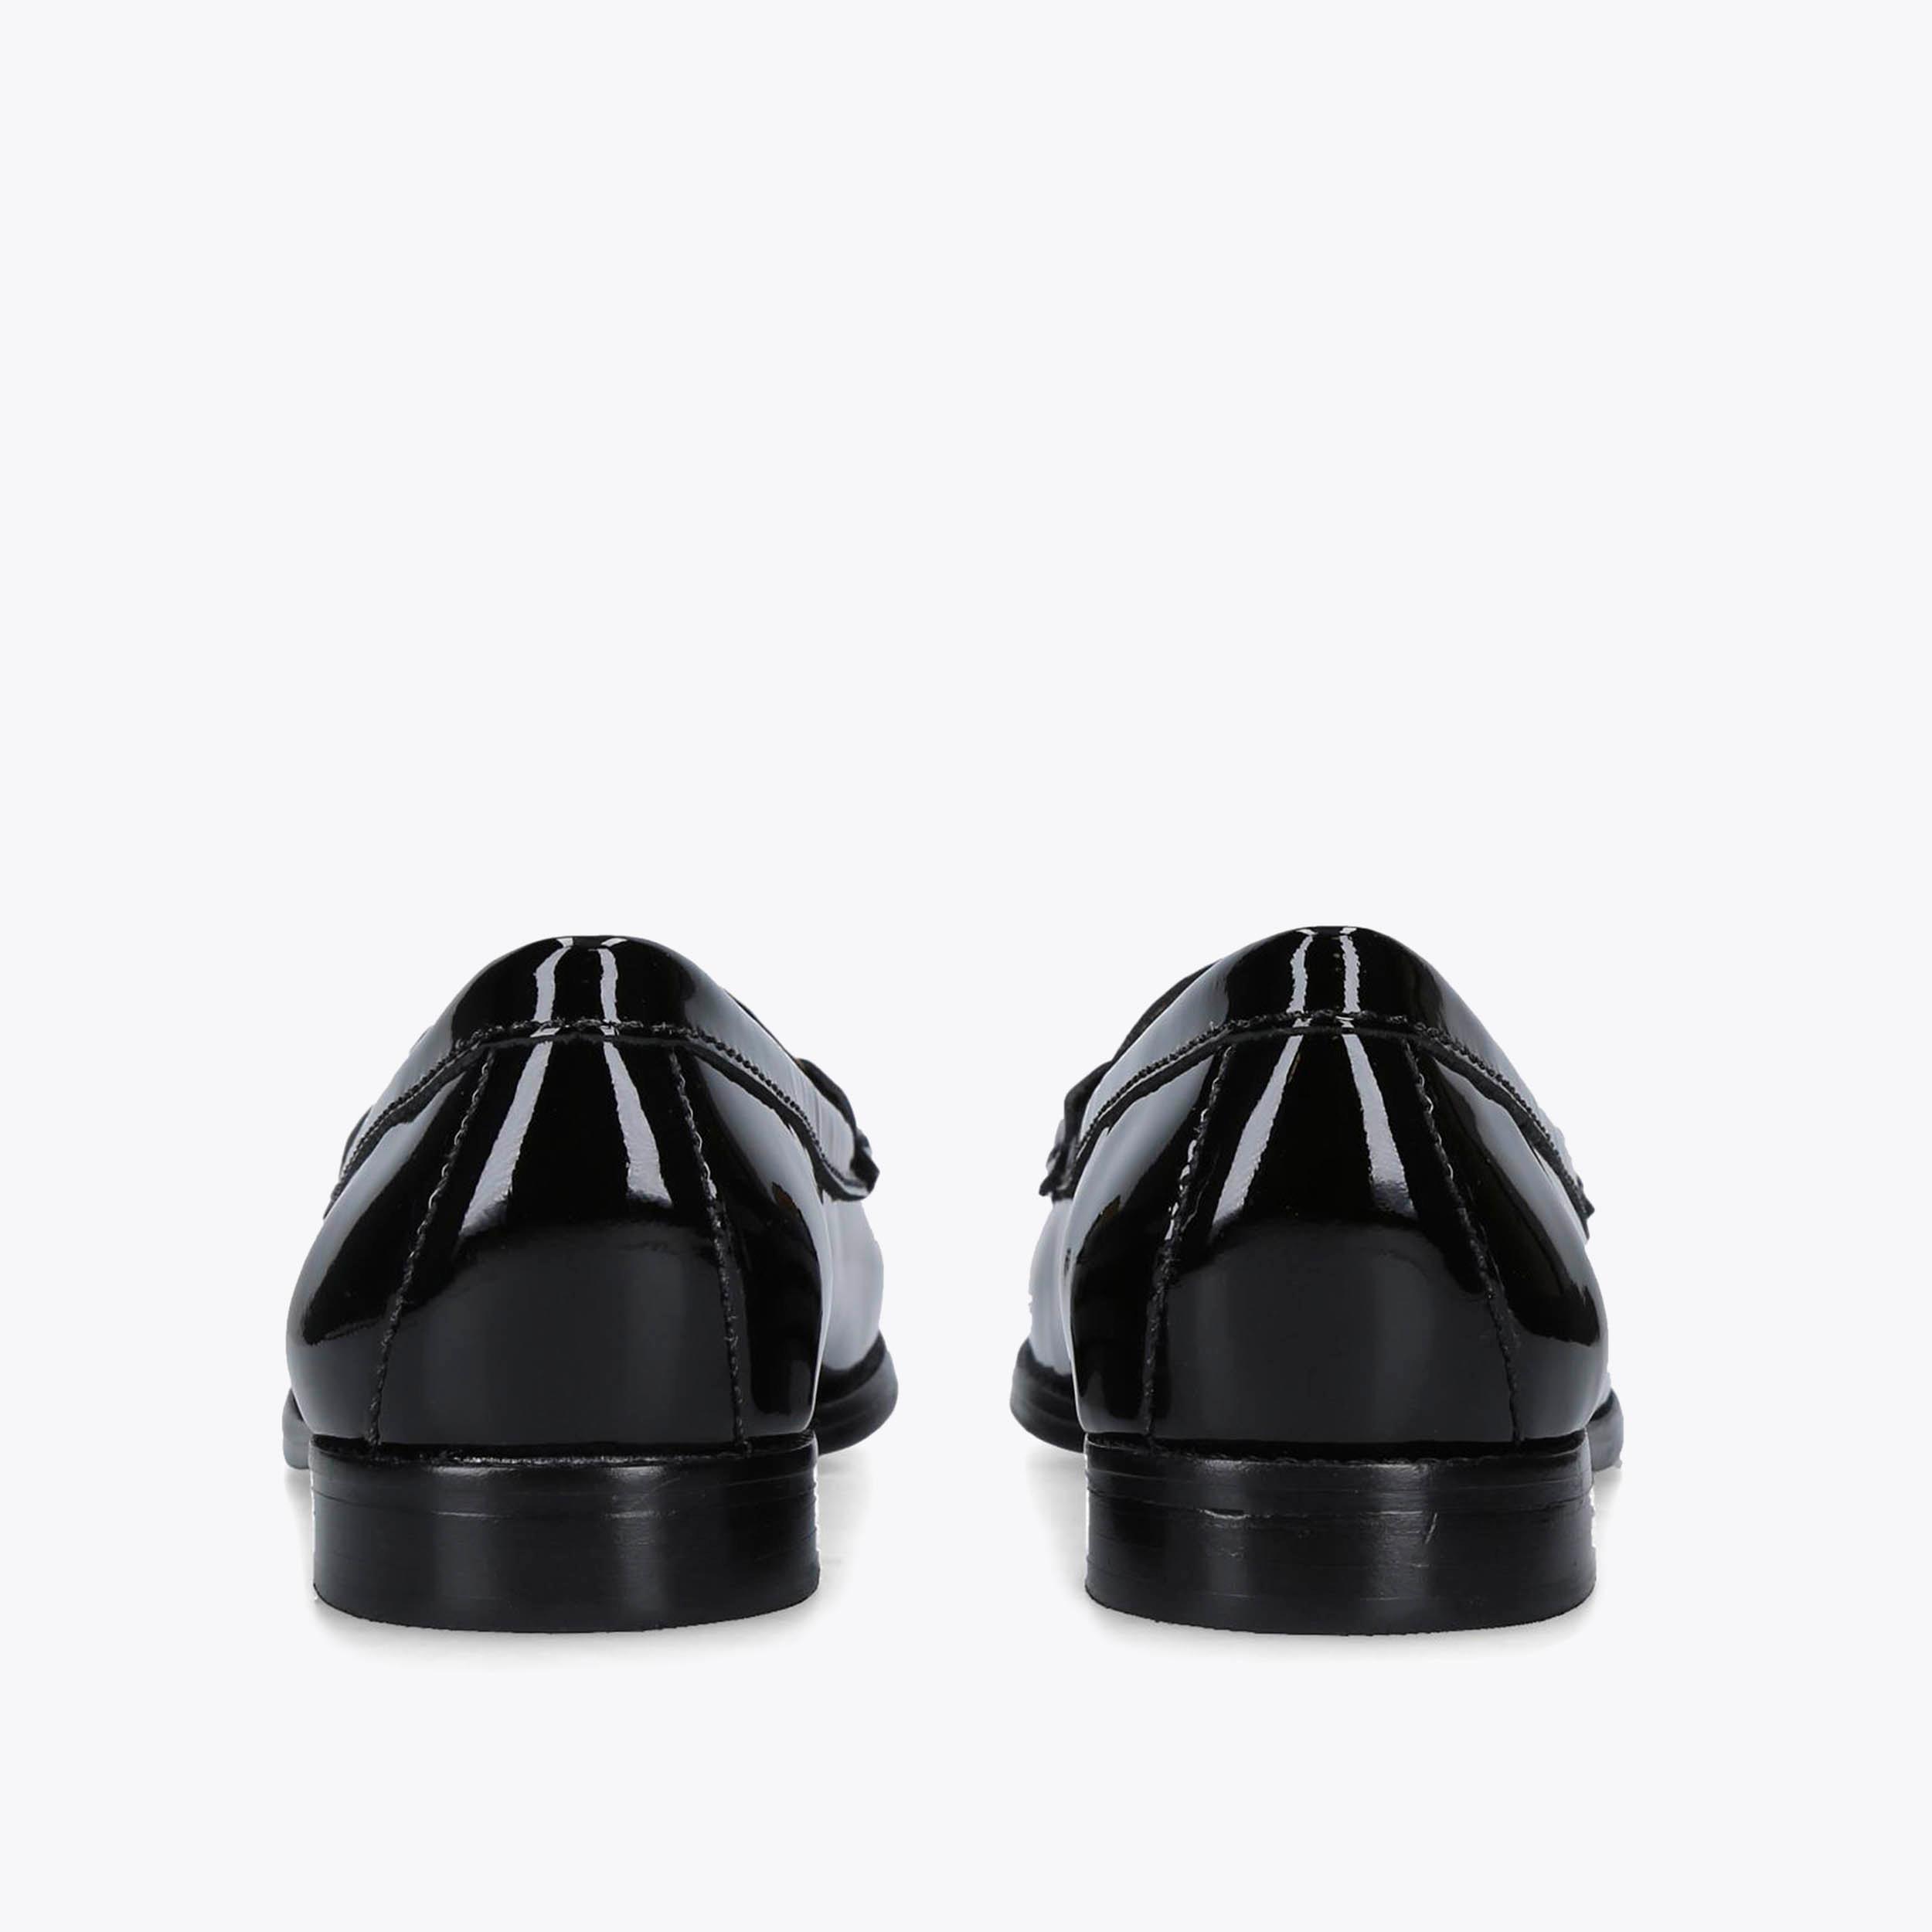 CLICK 2 Black Patent Loafers by CARVELA COMFORT